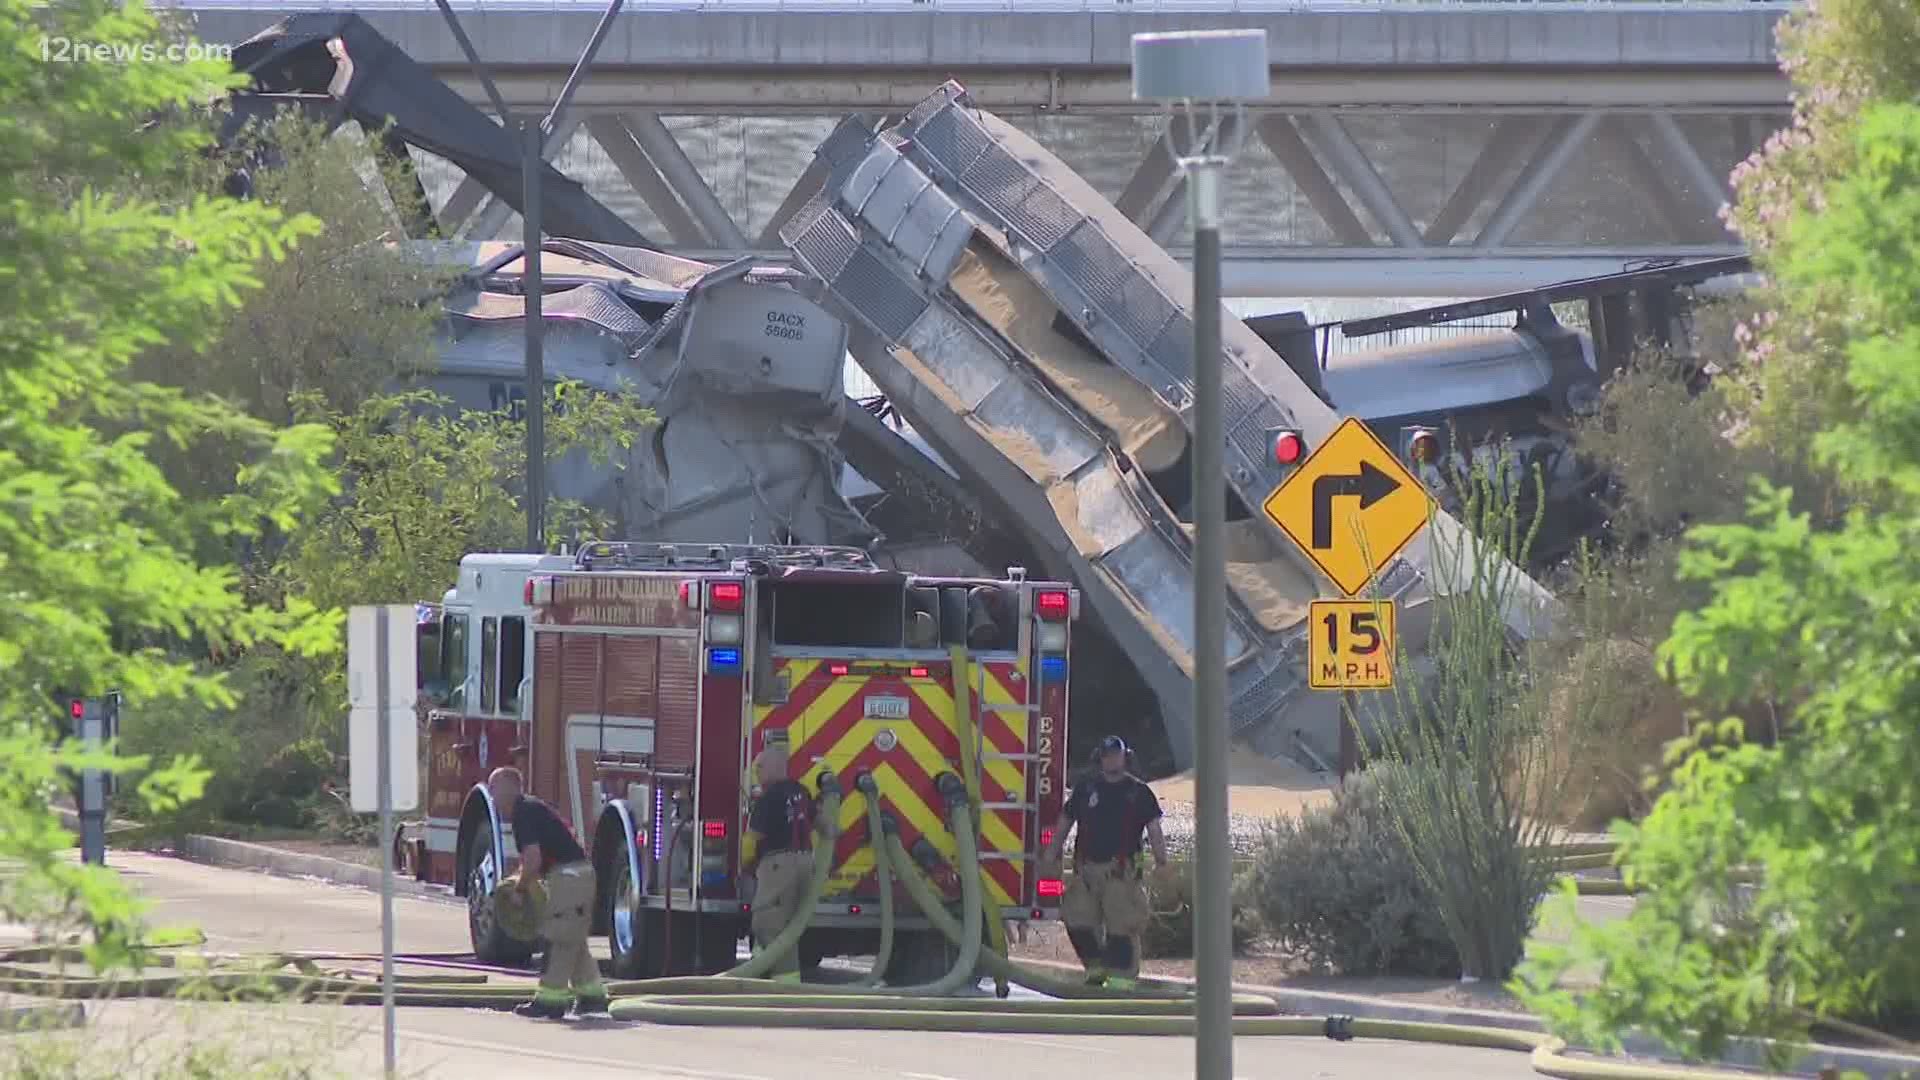 Fire crews were battling a massive fire involving a train on the Tempe Town Lake bridge early Wednesday. Heavy smoke was seen over Tempe Town Lake by Sky 12.